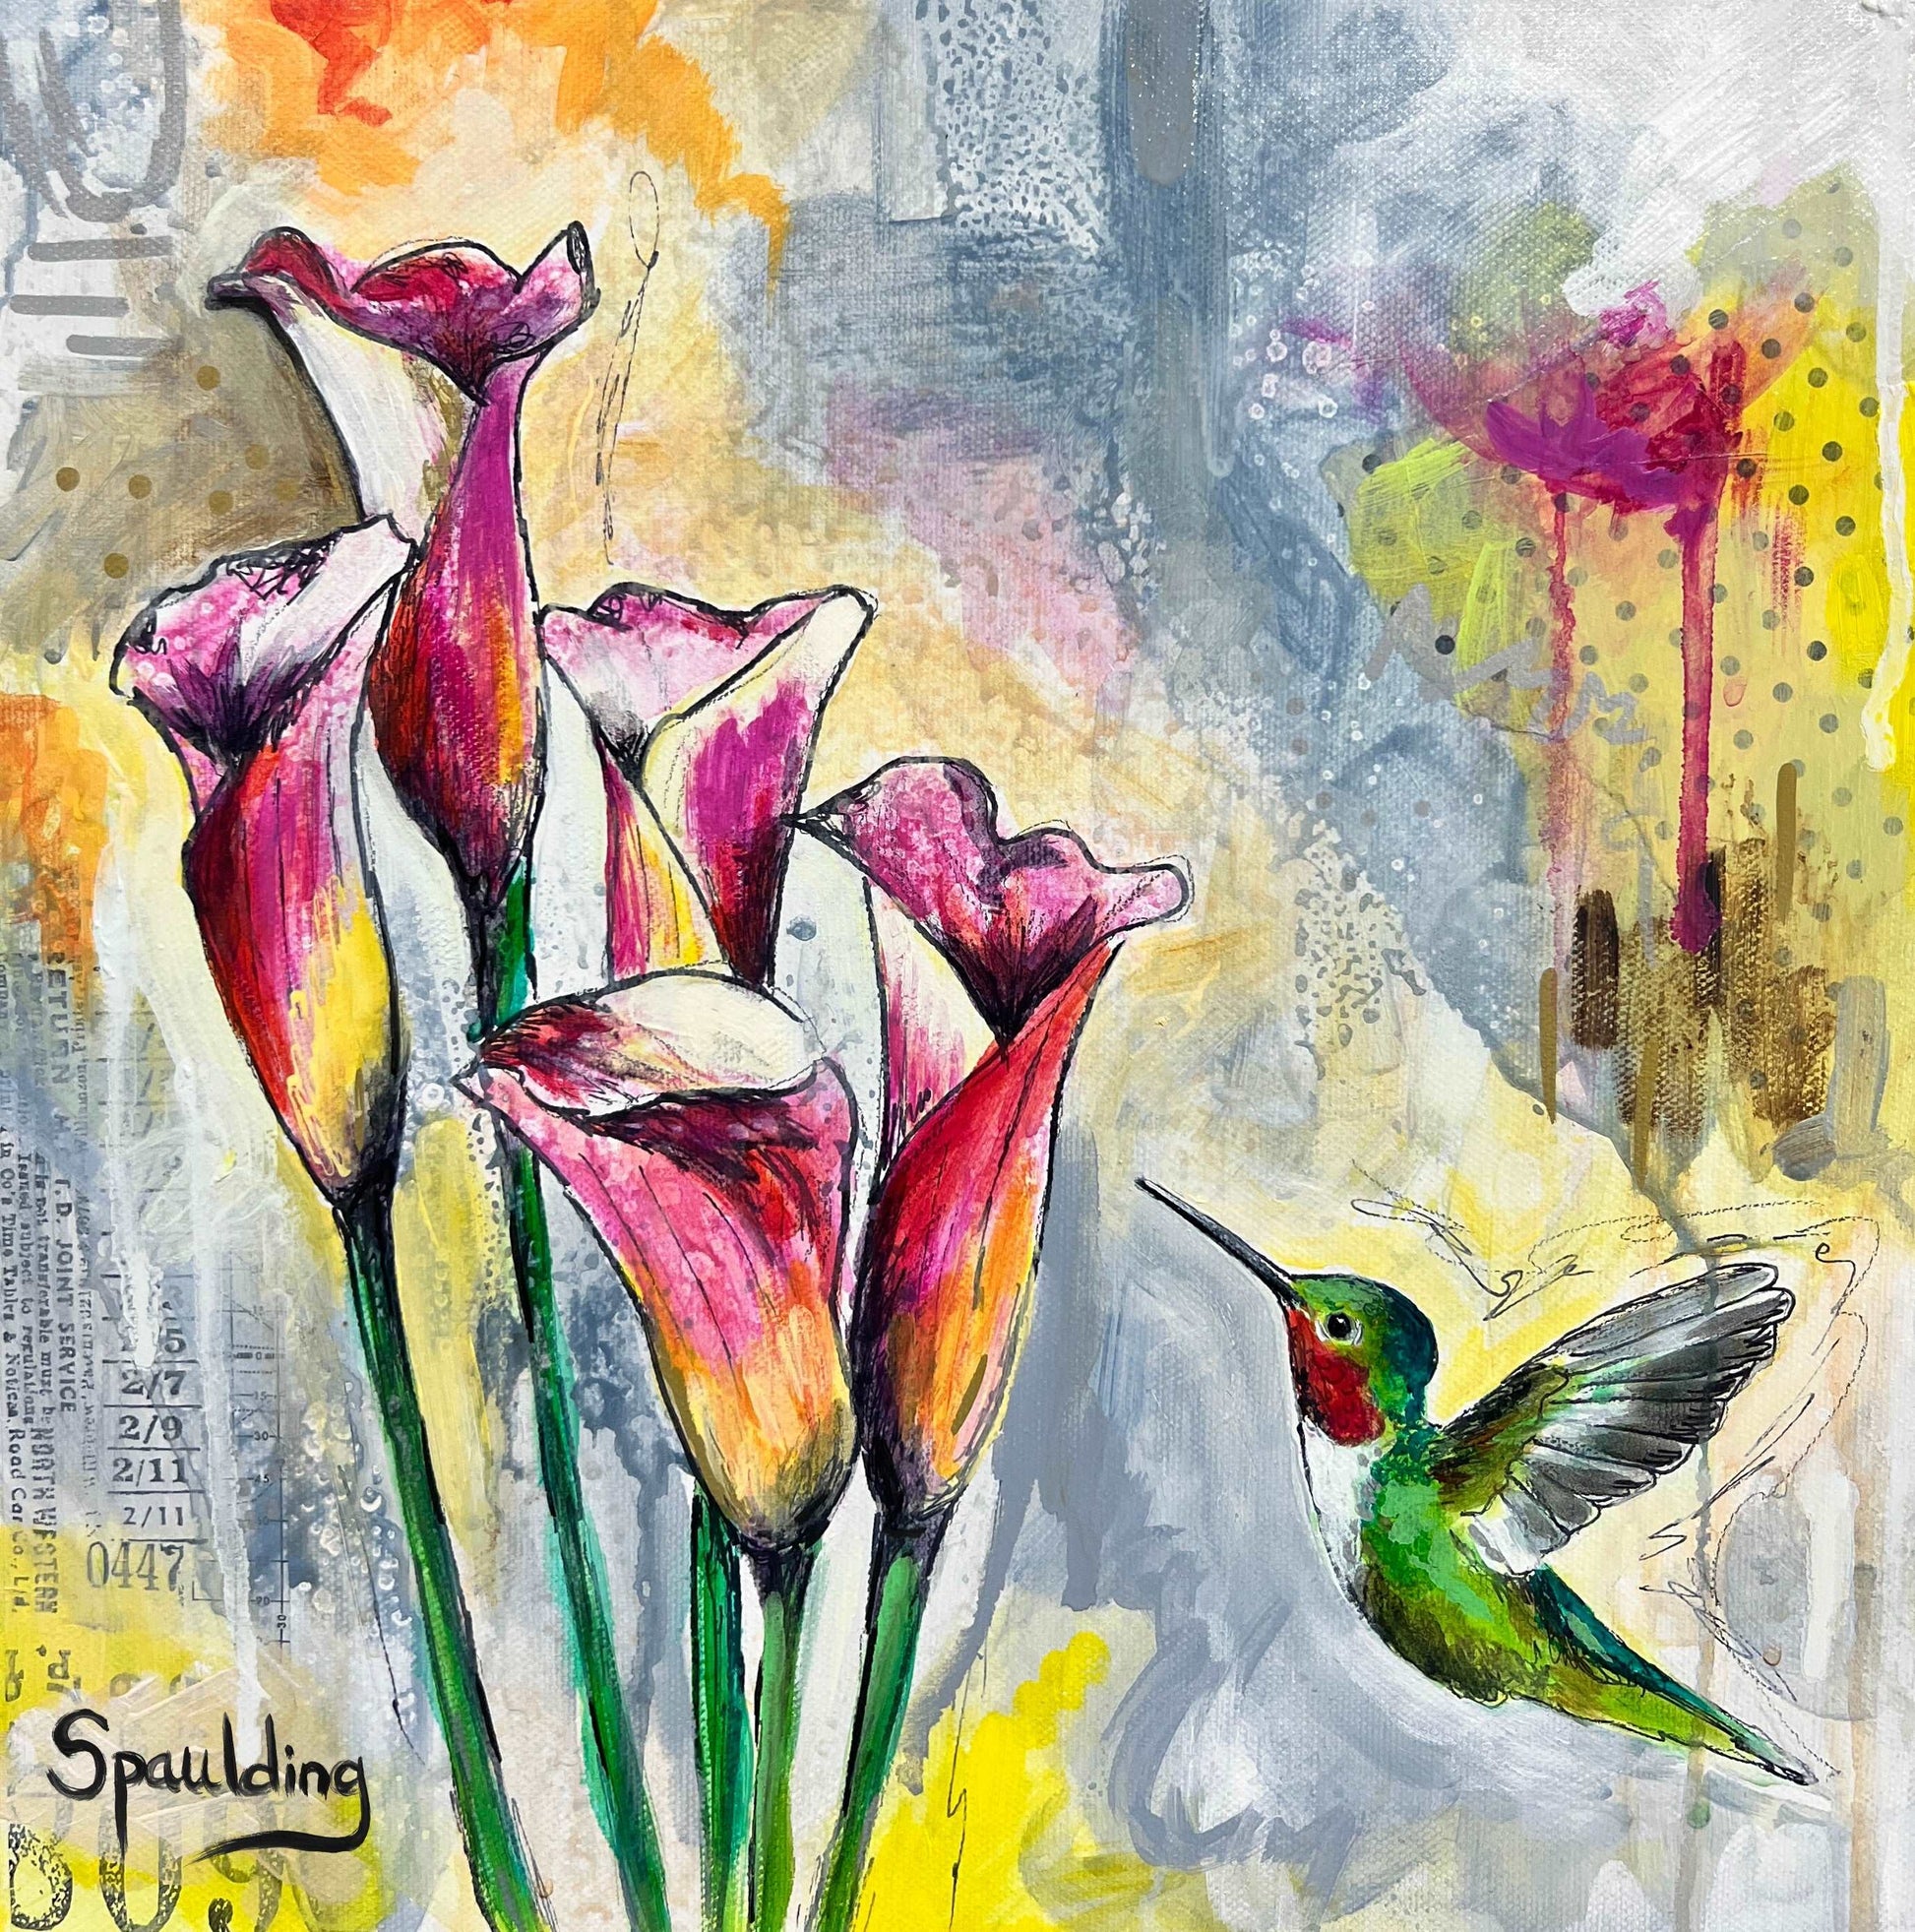  Colorful calla lilies and a hummingbird on a textured, abstract background in a mixed-media painting.